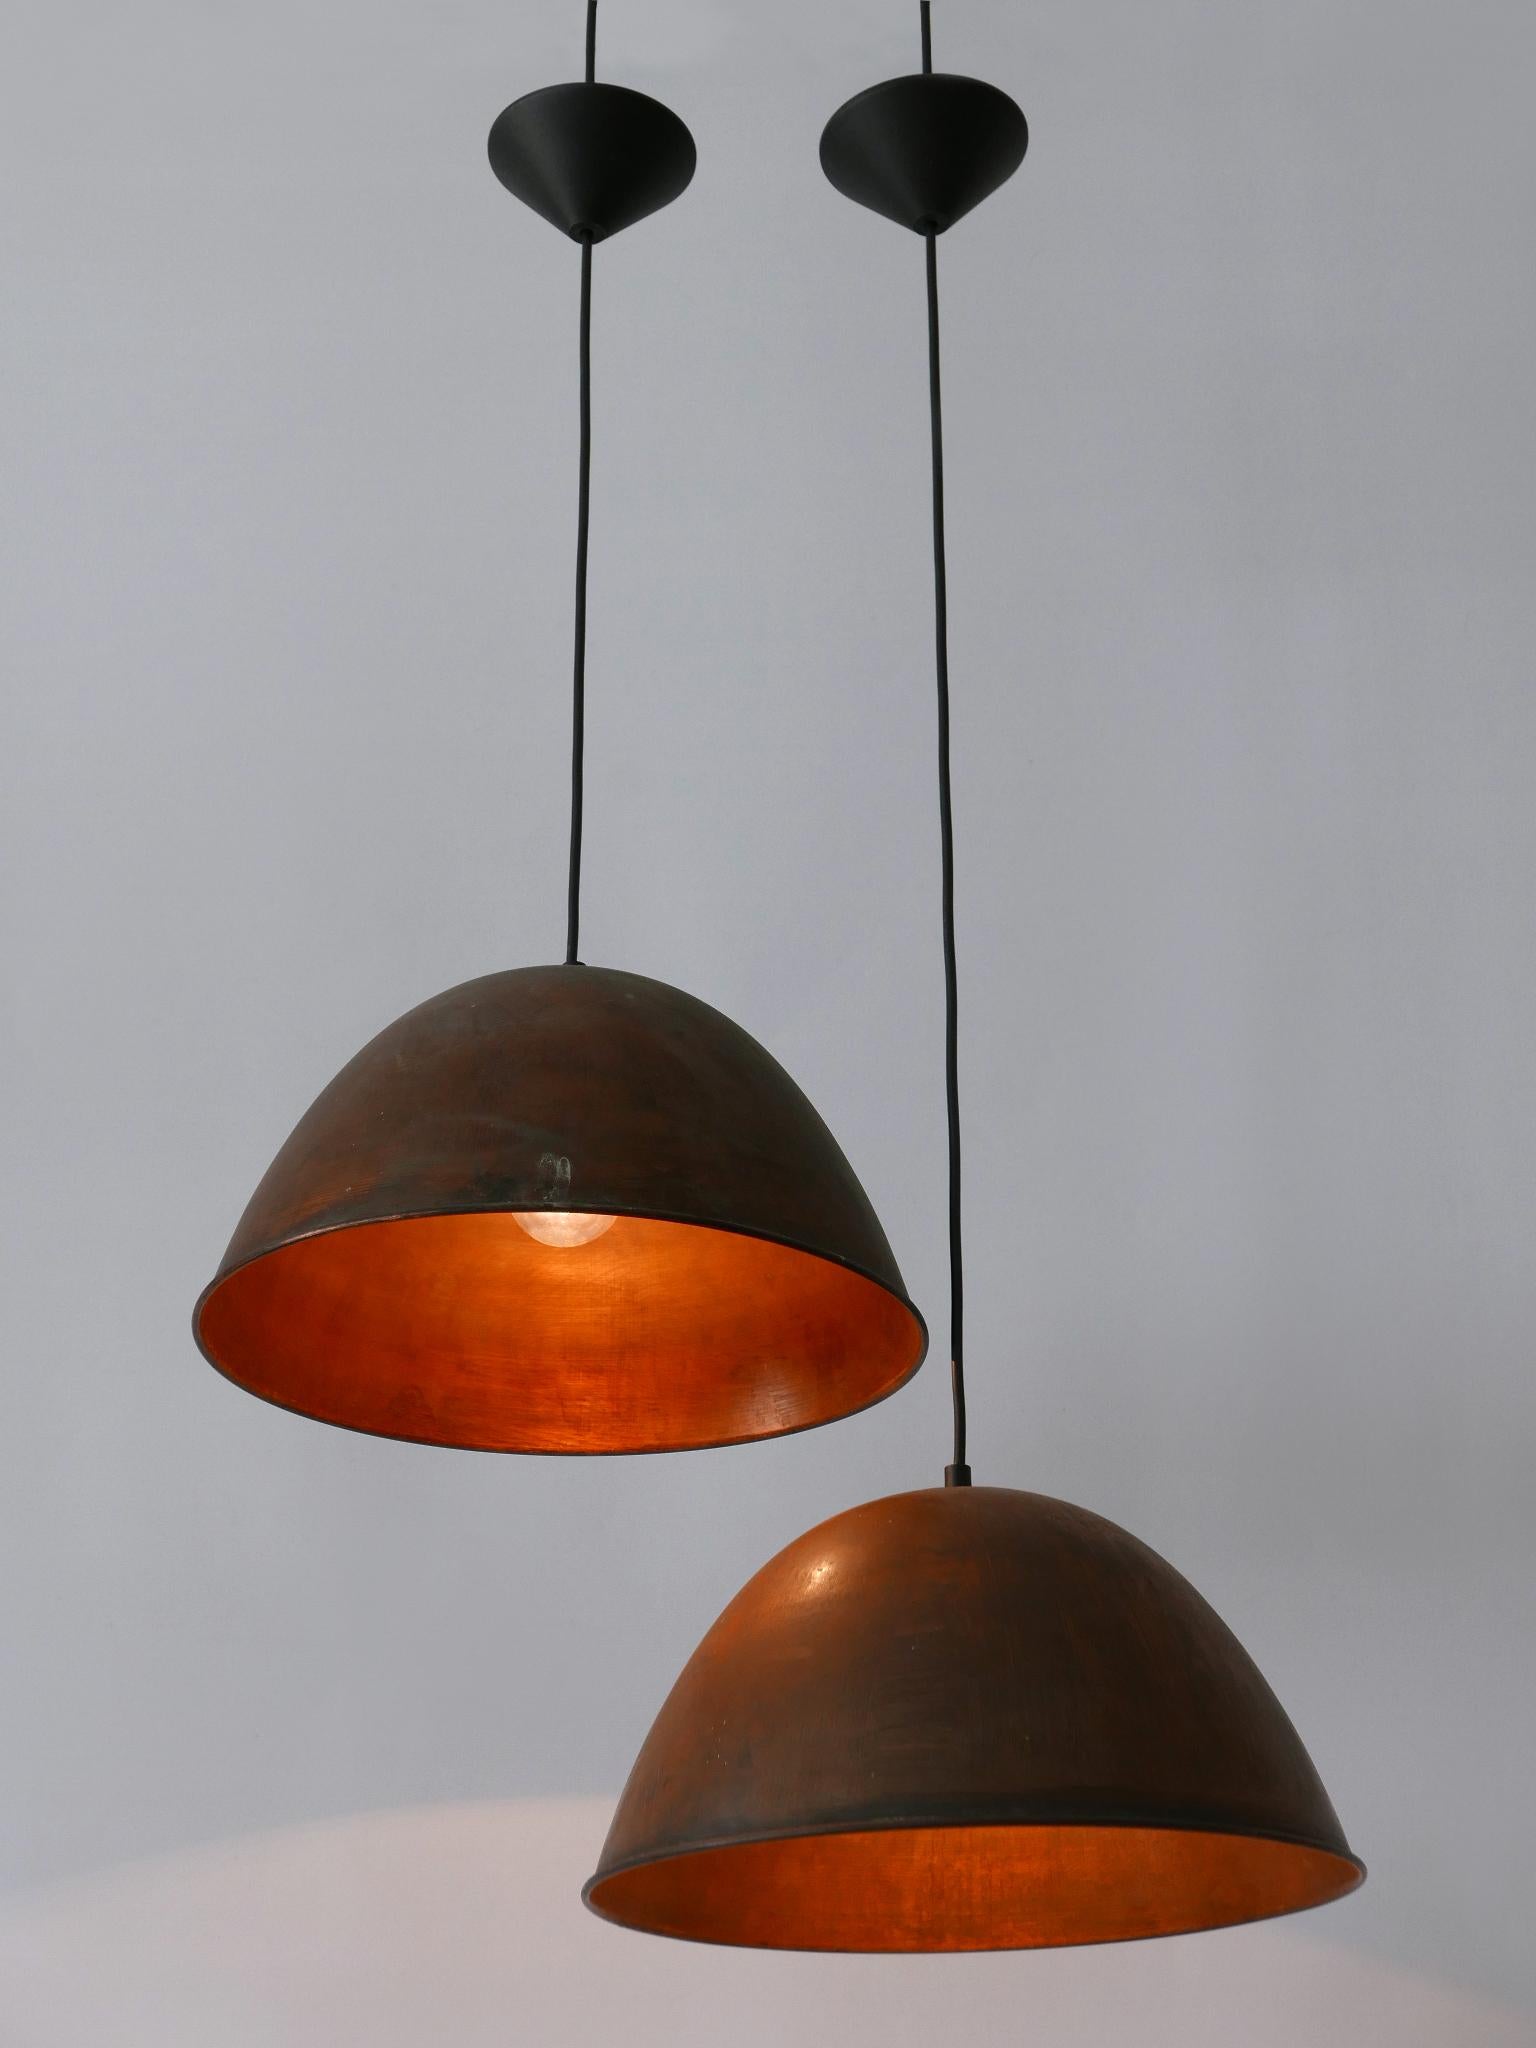 Set of Two Mid-Century Modern Copper Pendant Lamps or Hanging Lights 1950s For Sale 8